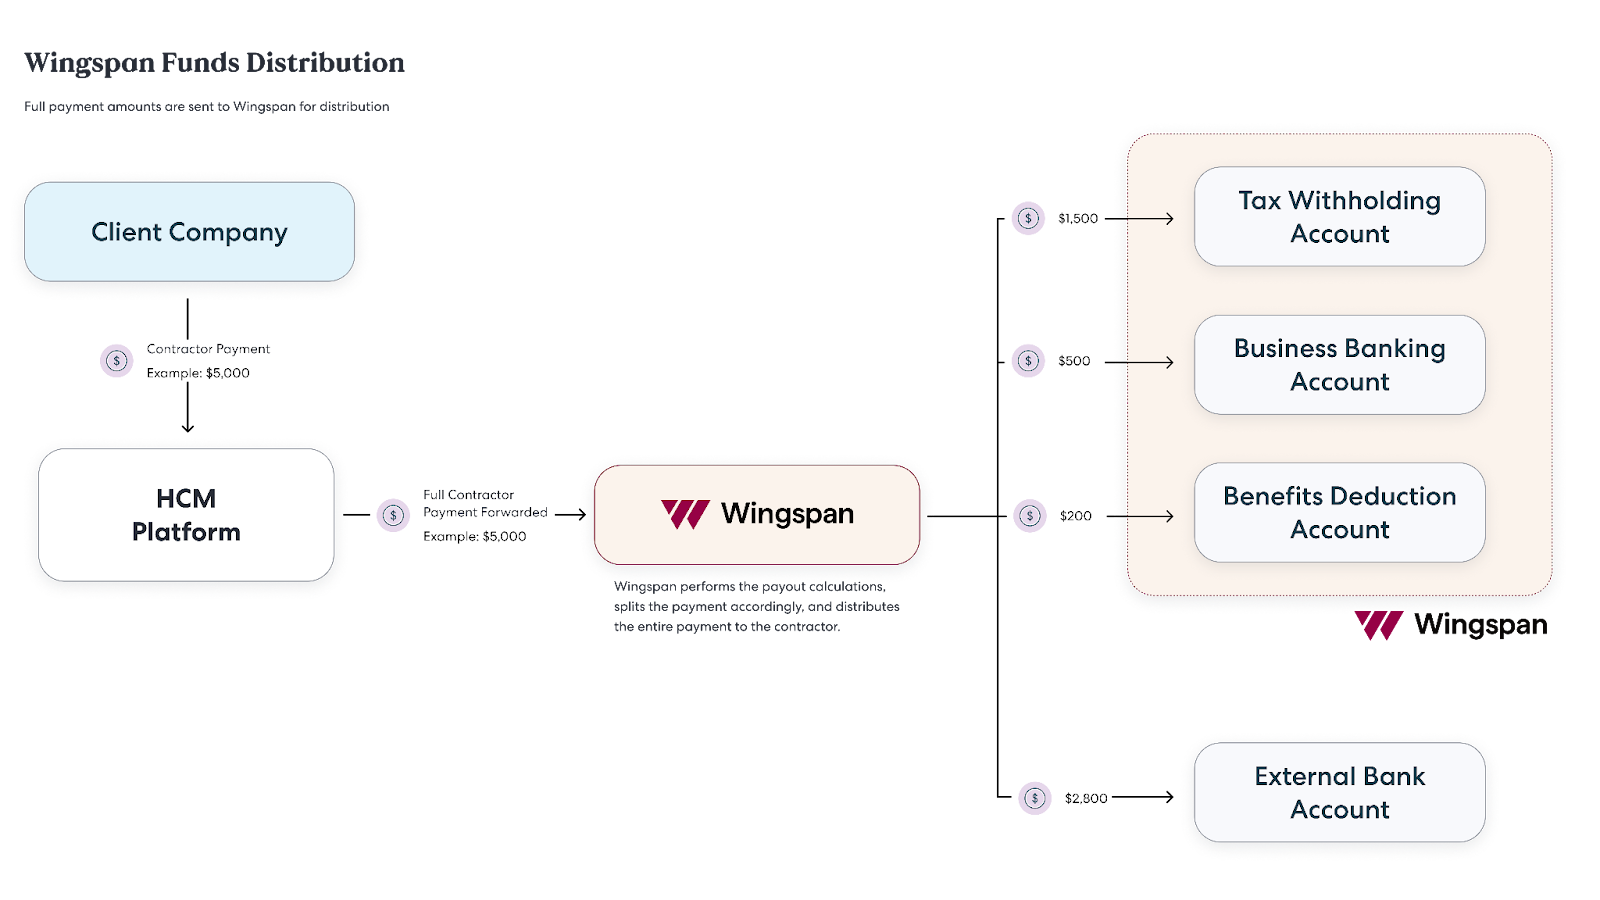 Wingspan Managed Funds Distribution